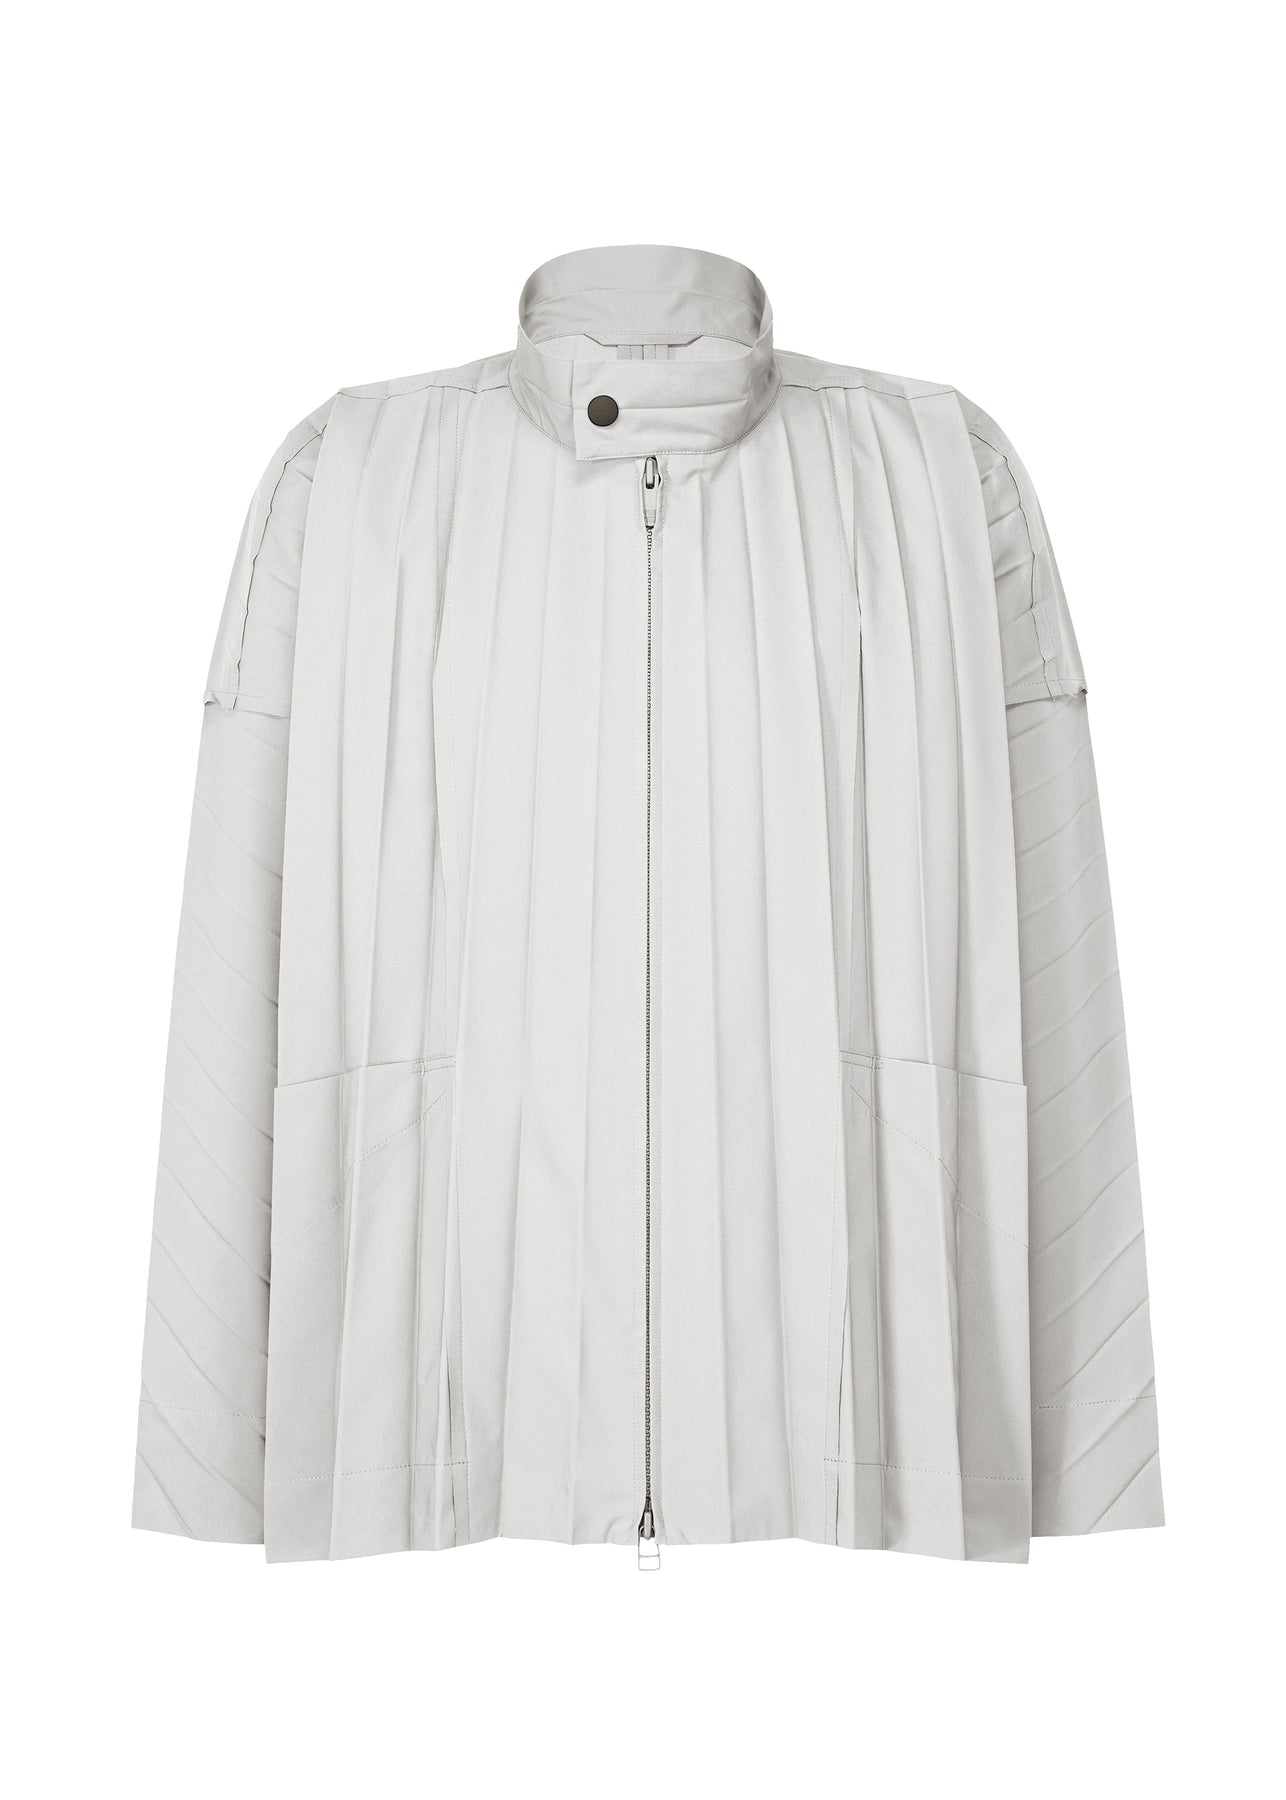 EDGE COAT JACKET | The official ISSEY MIYAKE ONLINE STORE | ISSEY